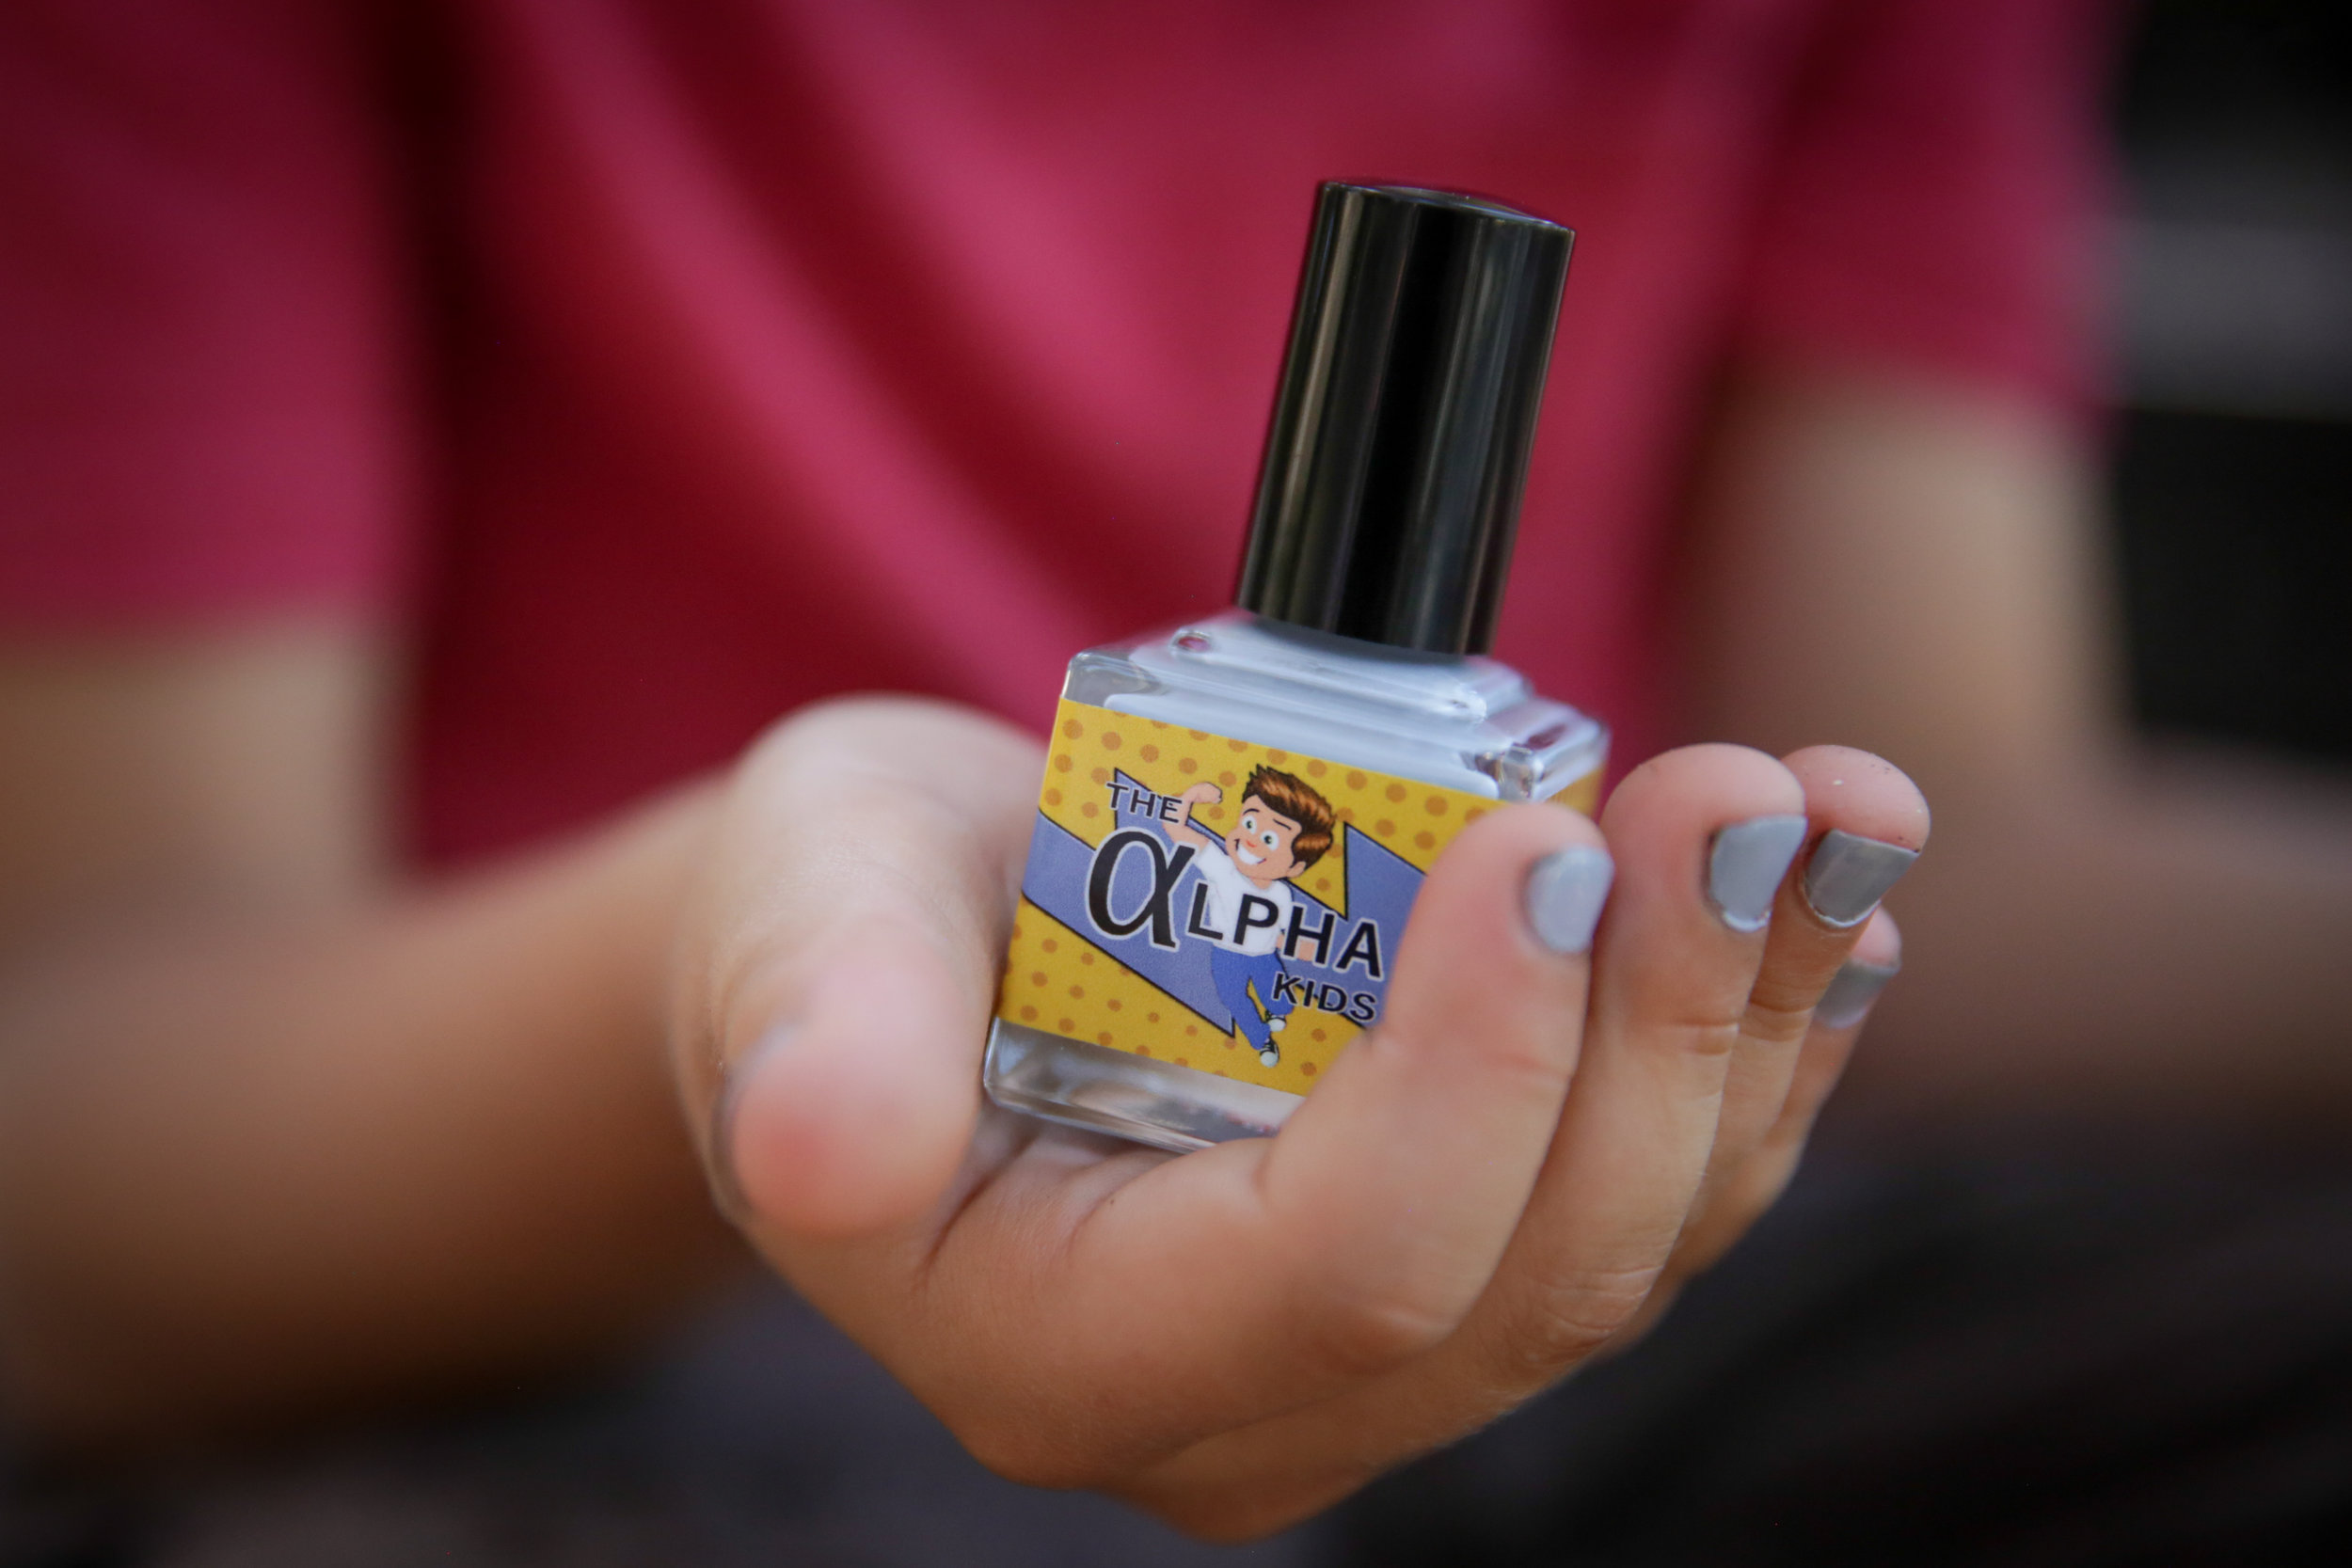 1. "Gender-neutral nail polish for kids" - wide 5